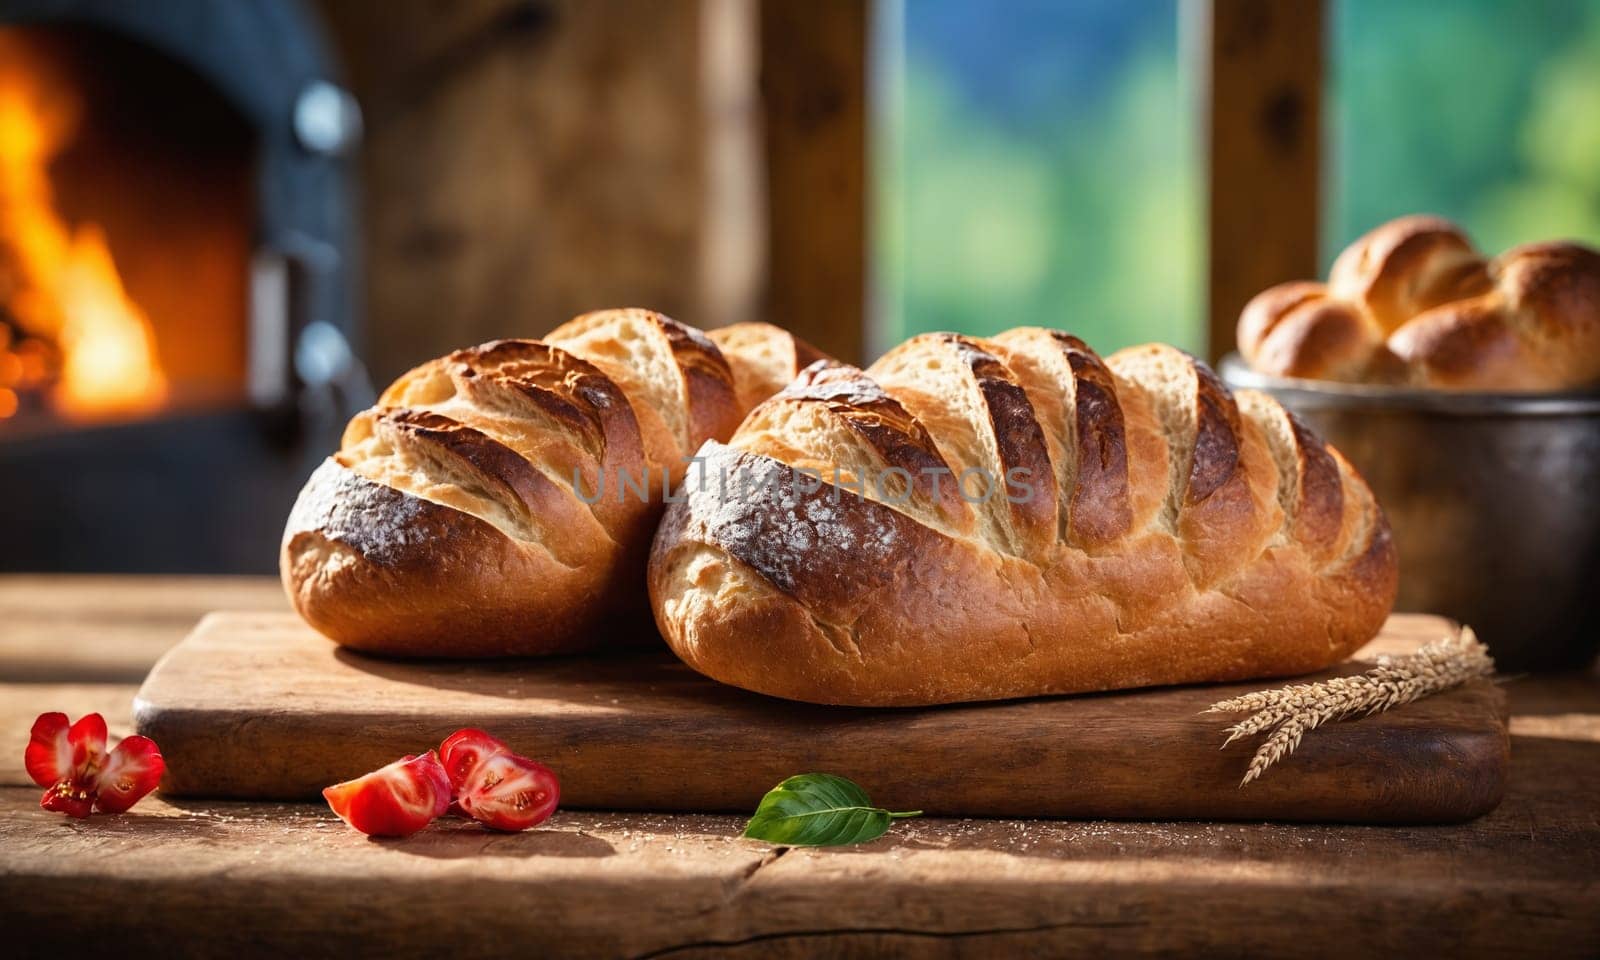 Two loaves of bread, a staple food, are resting on a wooden cutting board. They could be Cozonac, Challah, or any other baked goods waiting to be enjoyed as part of a delicious cuisine recipe